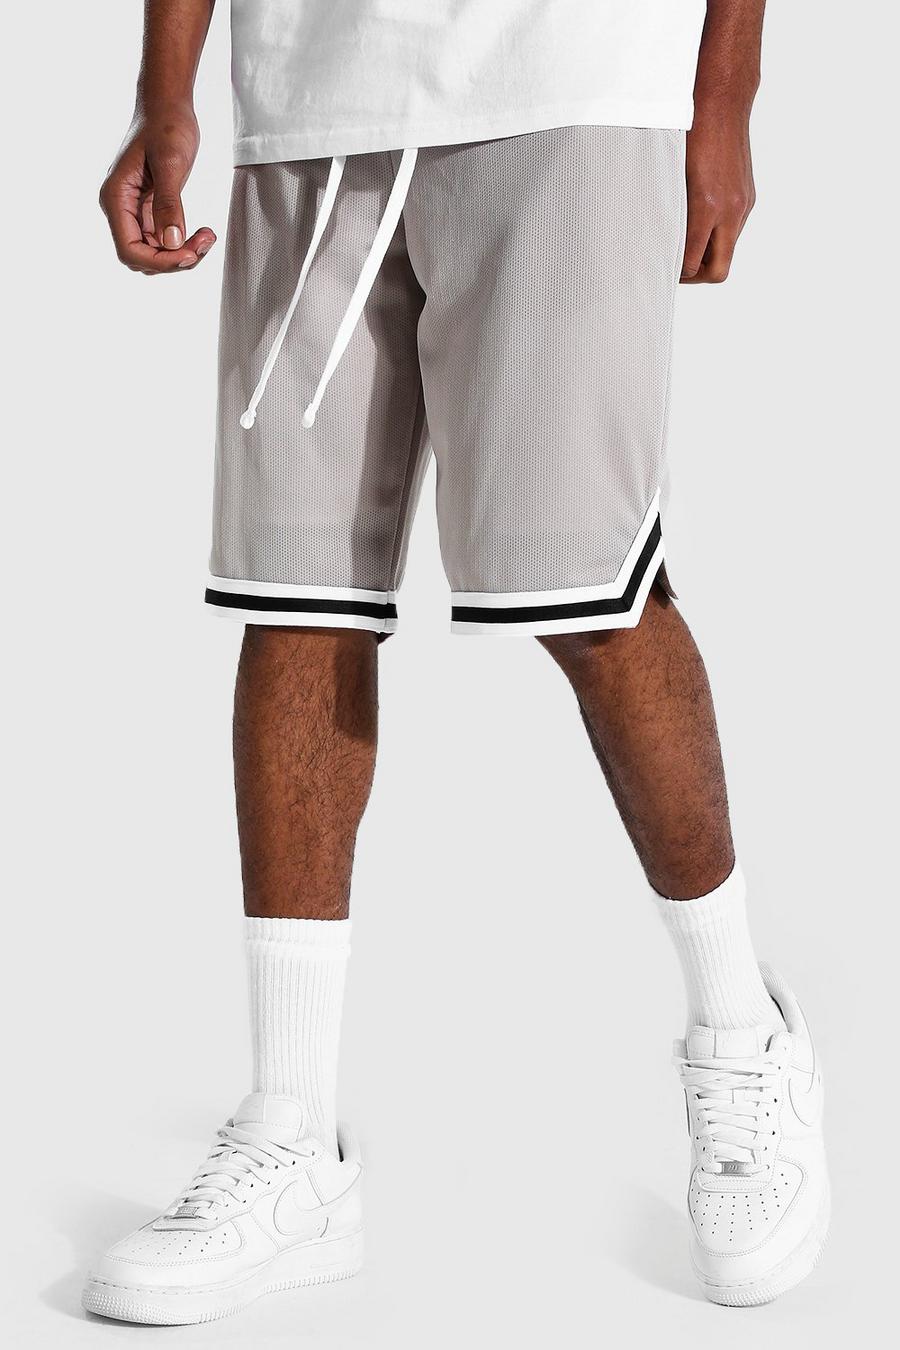 Stone Tall Mesh Basketball Shorts With Tape image number 1